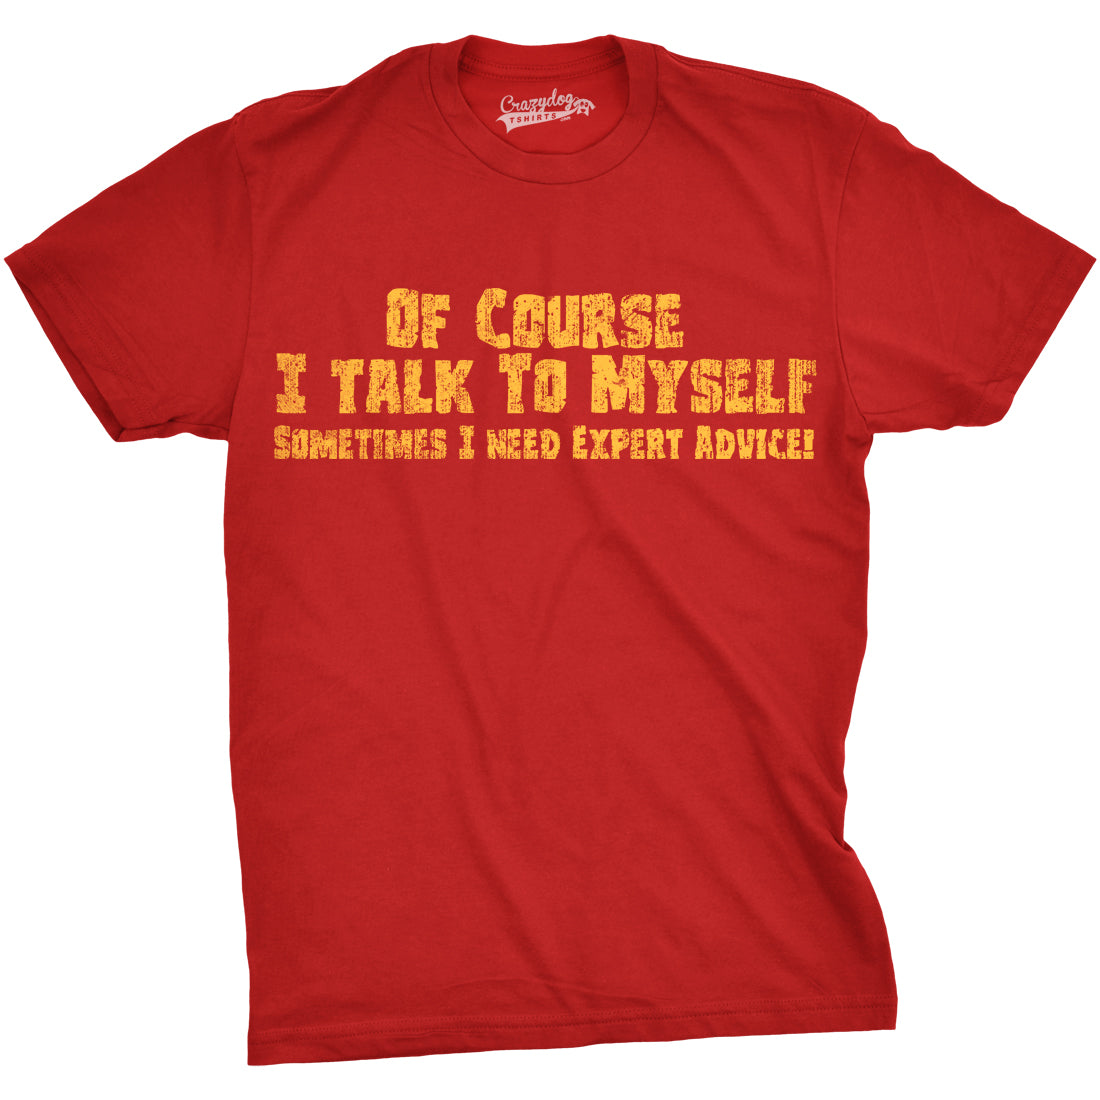 Funny Red Of Course I Talk To Myself, I Need Expert Advice Mens T Shirt Nerdy Sarcastic Tee